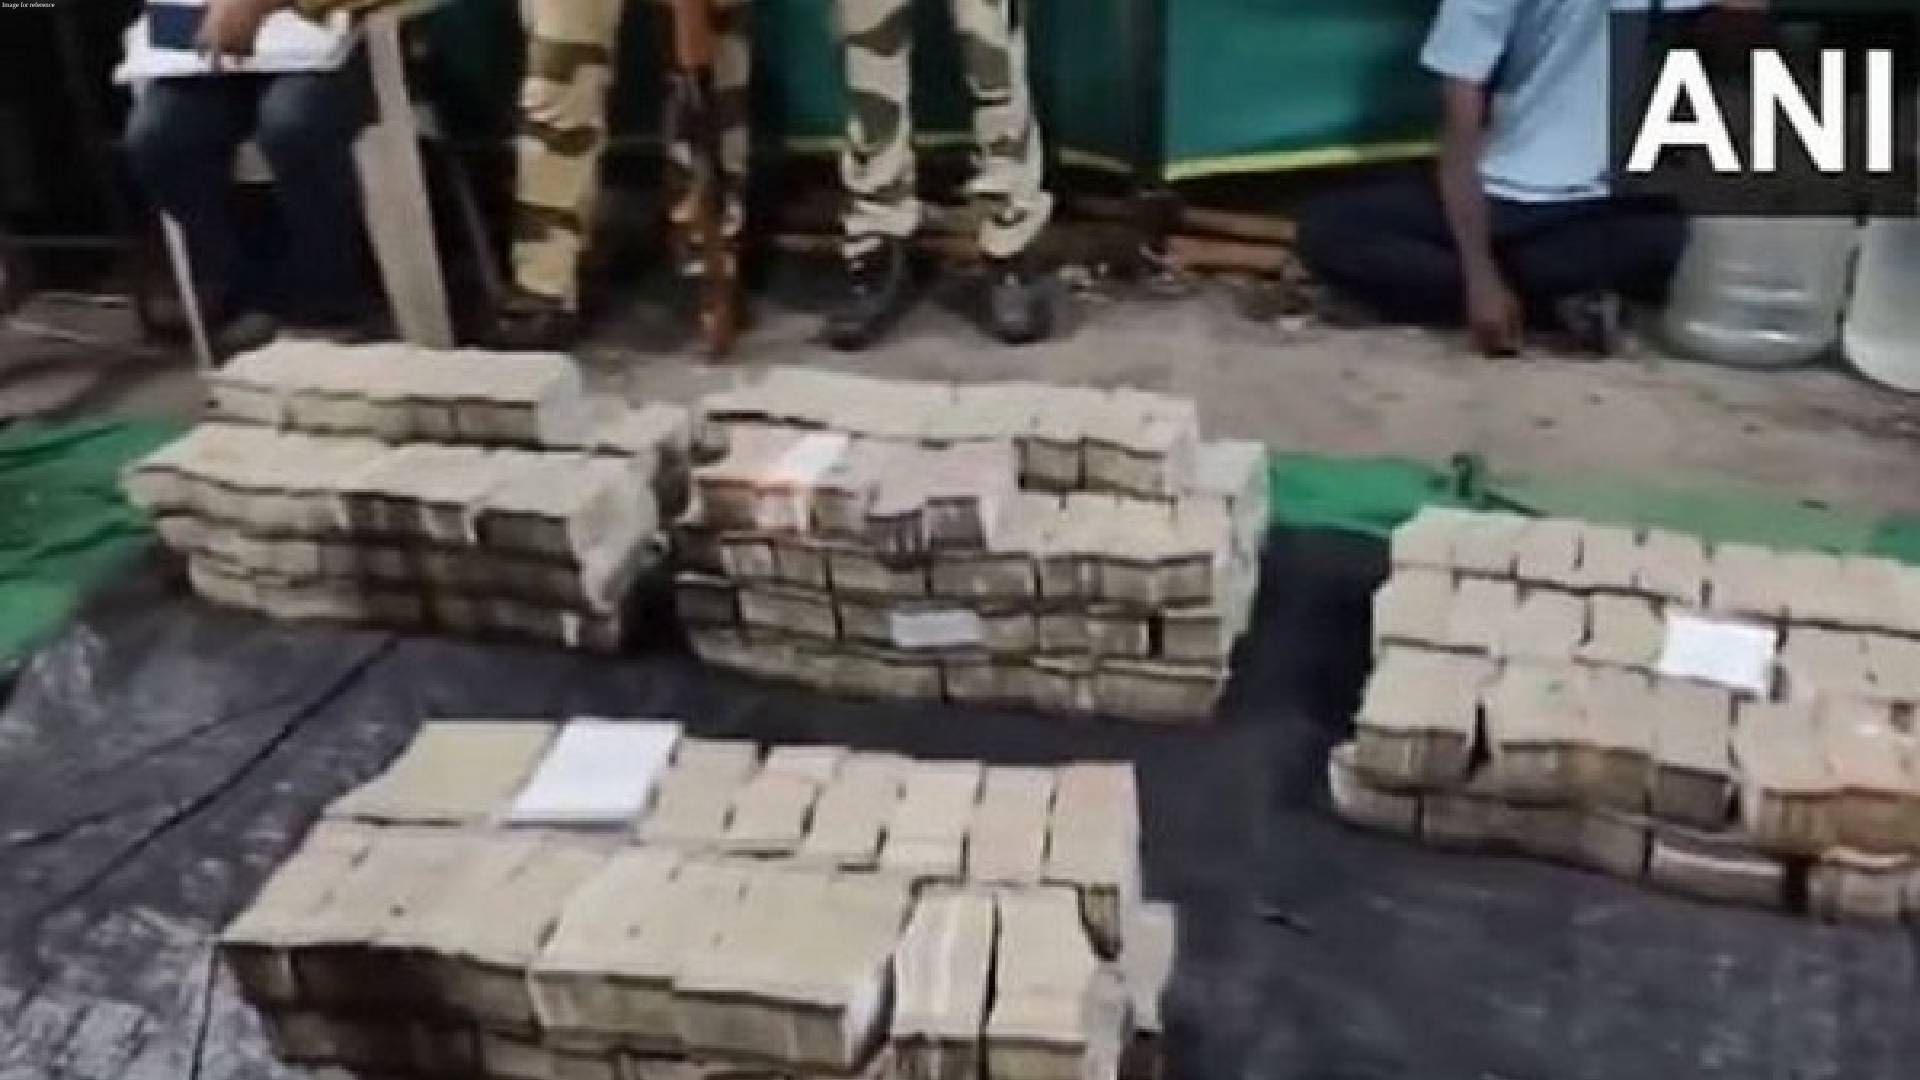 Andhra Pradesh: NTR district police seize cash worth Rs 8 crores, two persons detained